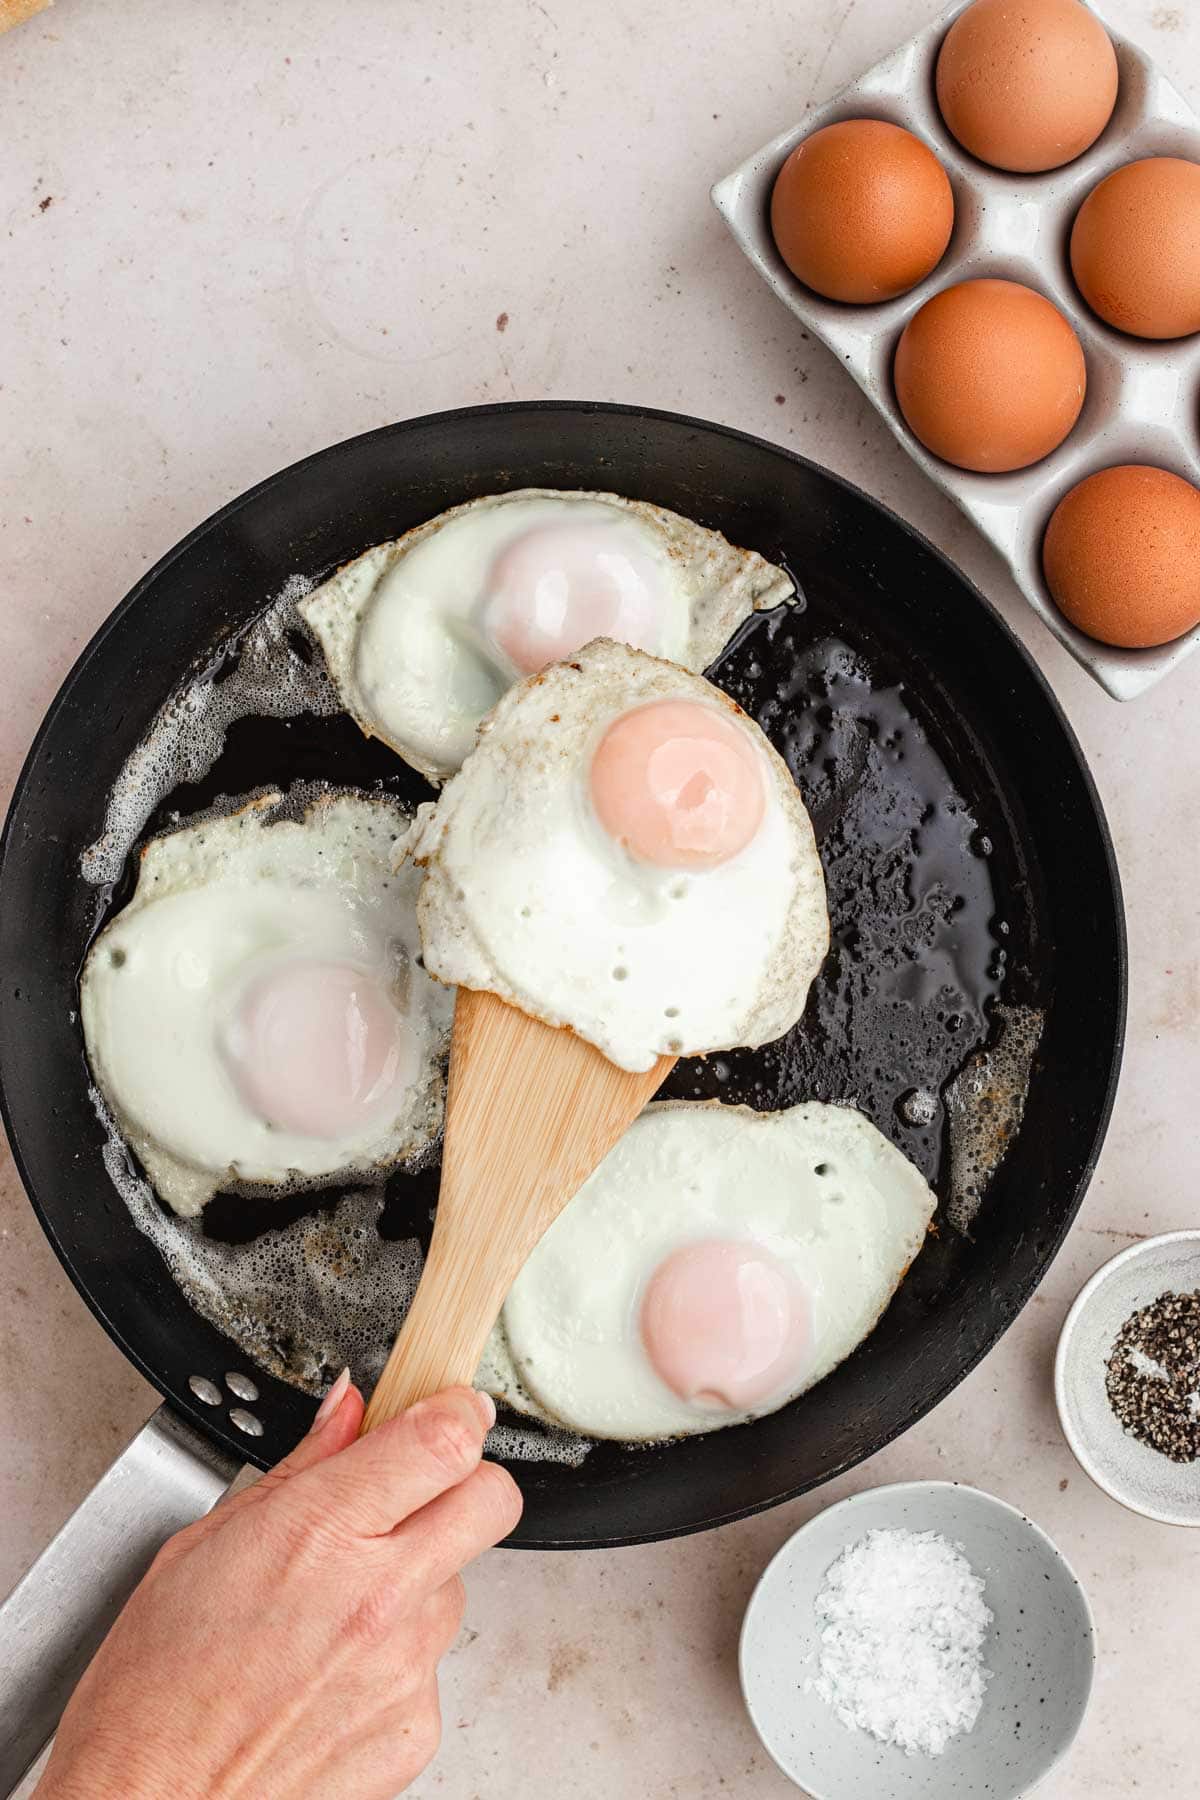 Over Easy Eggs in the pan being flipped